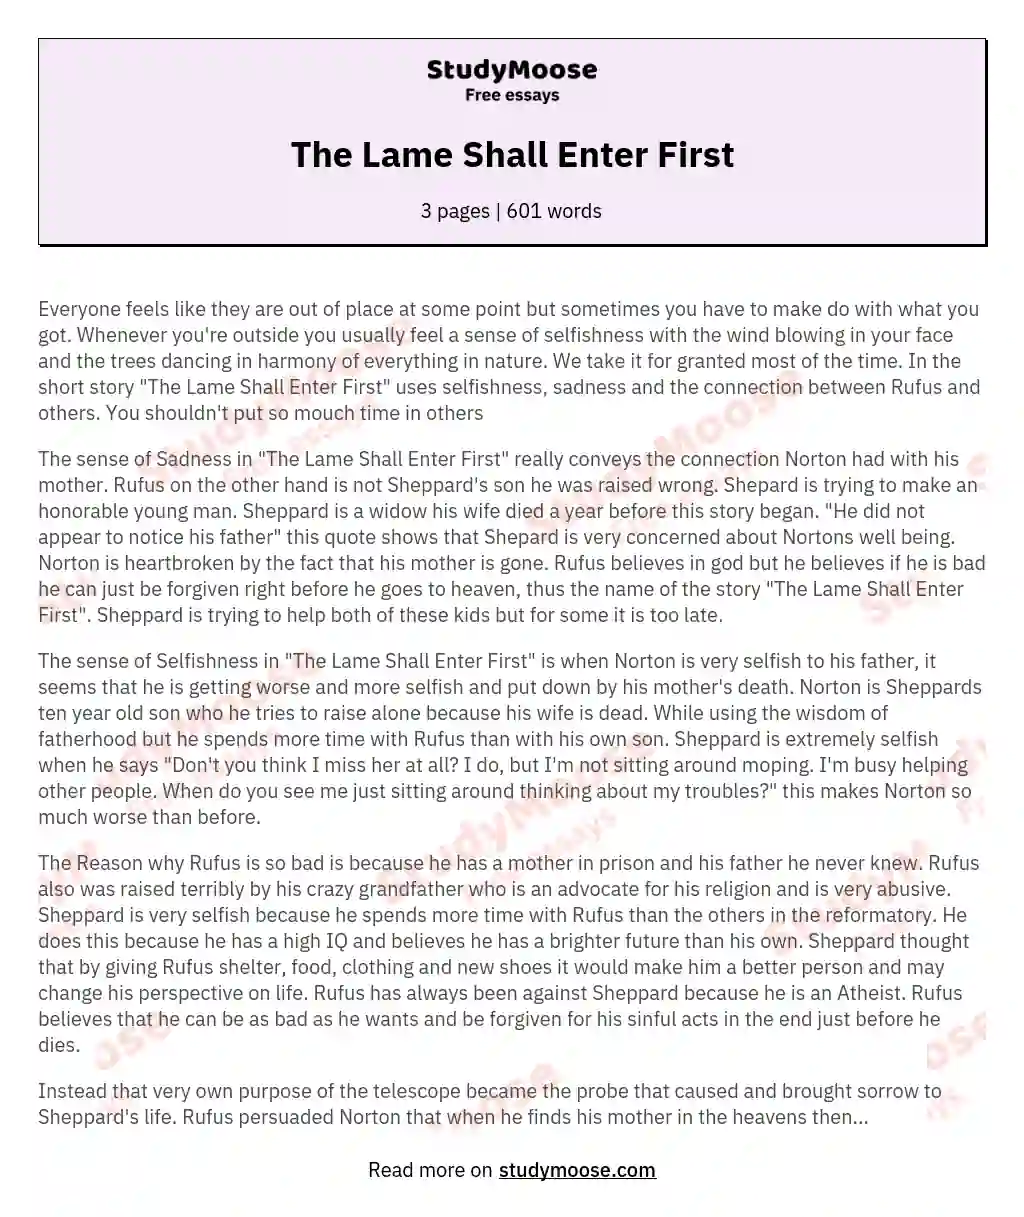 The Lame Shall Enter First essay